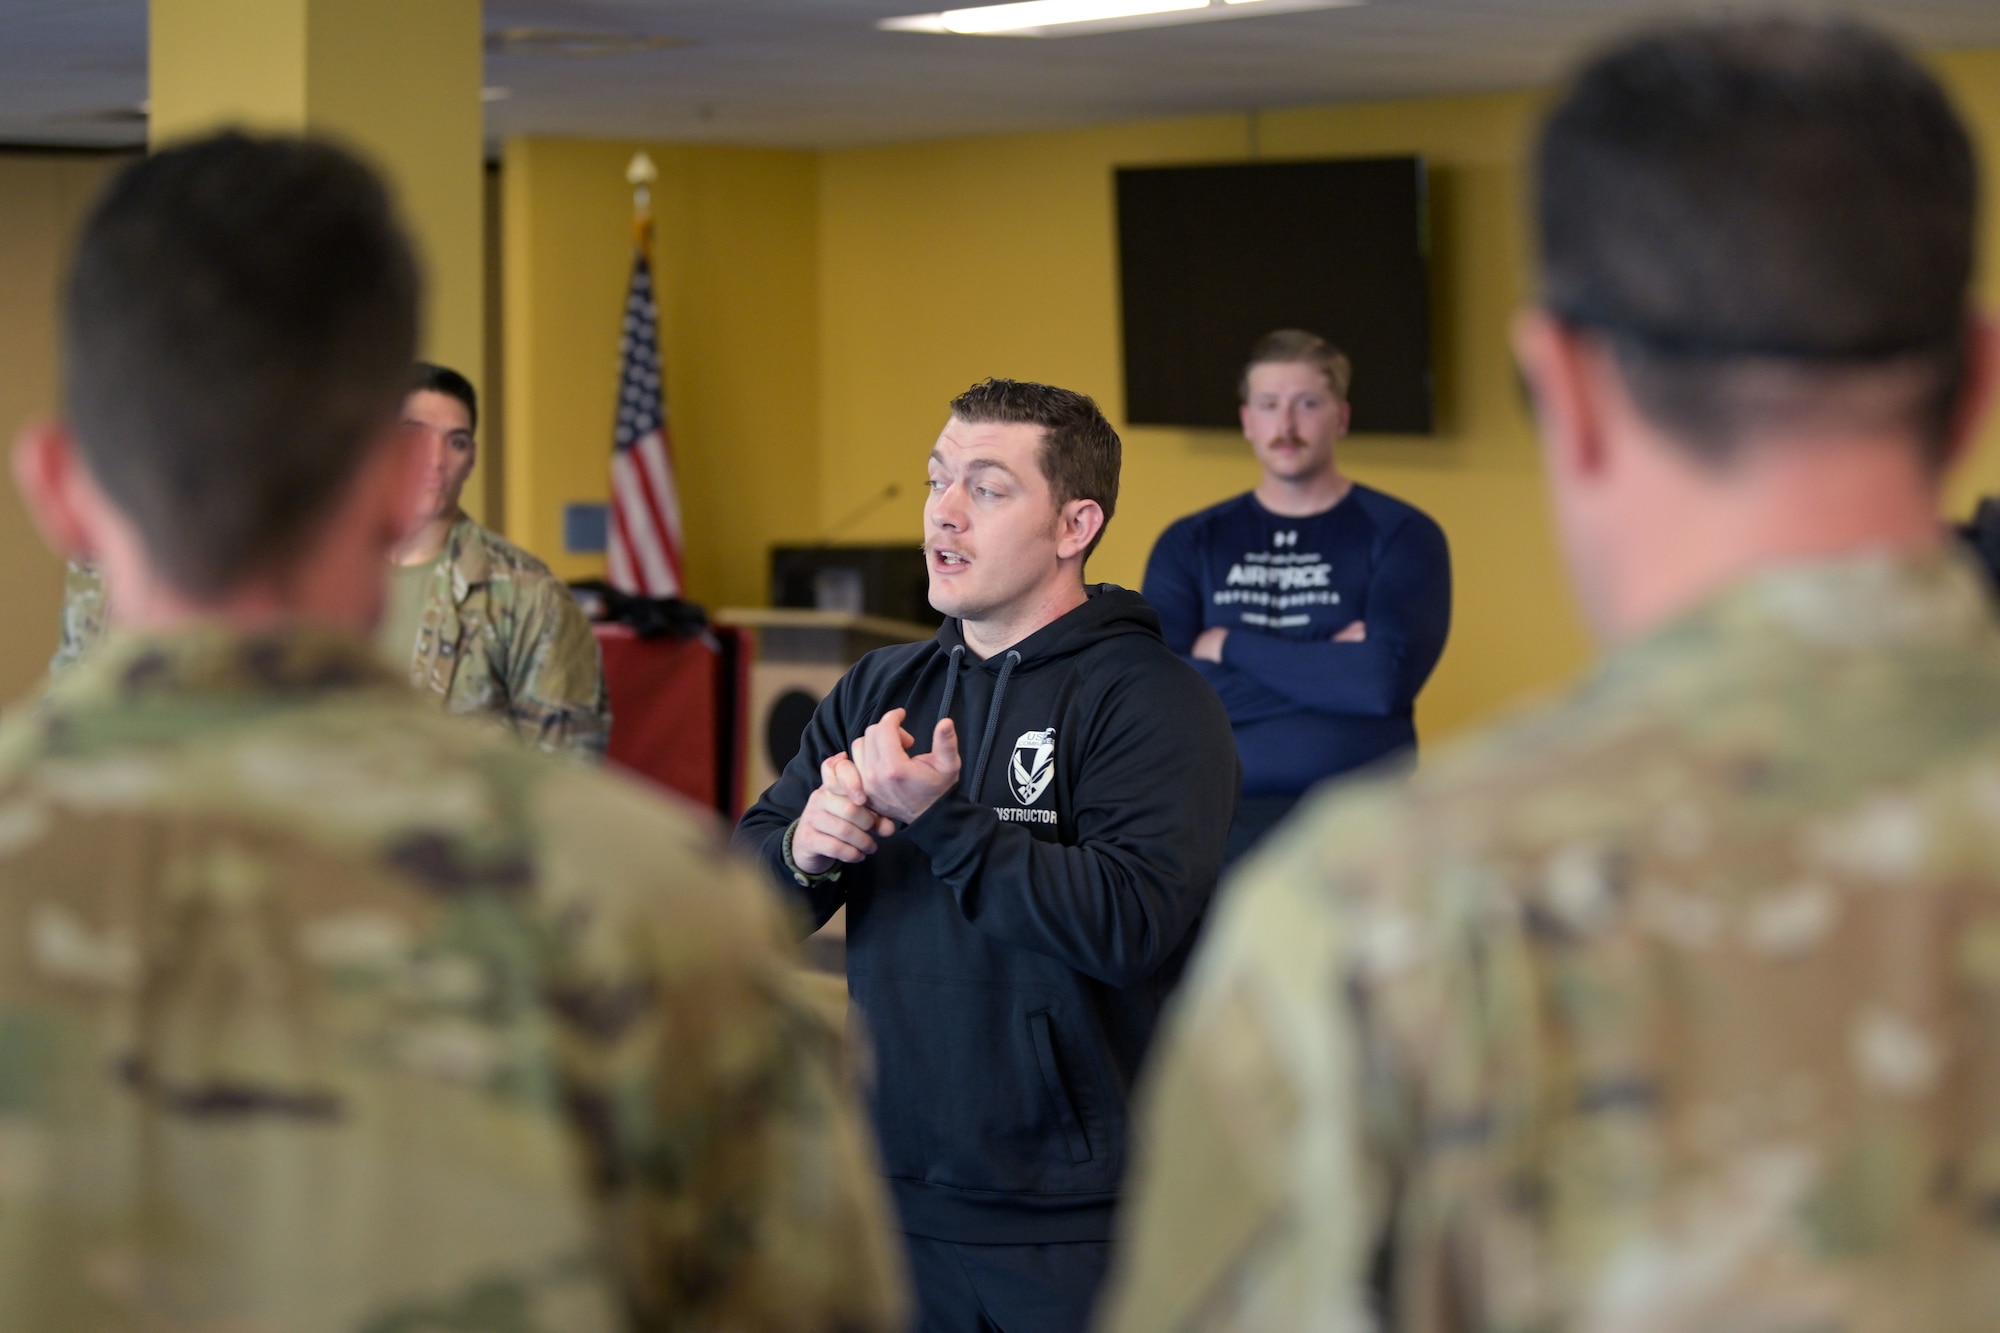 U.S. Air Force Staff Sgt. Zachery Jezewski, an Air Force senior combatives instructor, with the 421st Combat Training Squadron, Joint Base Mcguire-Dix-Lakehurst, conducts briefing to all Airmen and highlights safety and expectations, March 17, 2022 at Muñiz Air National Guard Base, Puerto Rico. The Air Force Combative training the 22 Airmen received can be applied on duty as much as off duty in a personal defense or life threatening situation. “Once these Airmen graduate, they’ll be able to conduct basic combatives training for anyone in the unit or anyone on base as far as life saving, self protection assets,” said Jezewski. (U.S. Air National Guard photo by Master Sgt. Rafael D. Rosa)